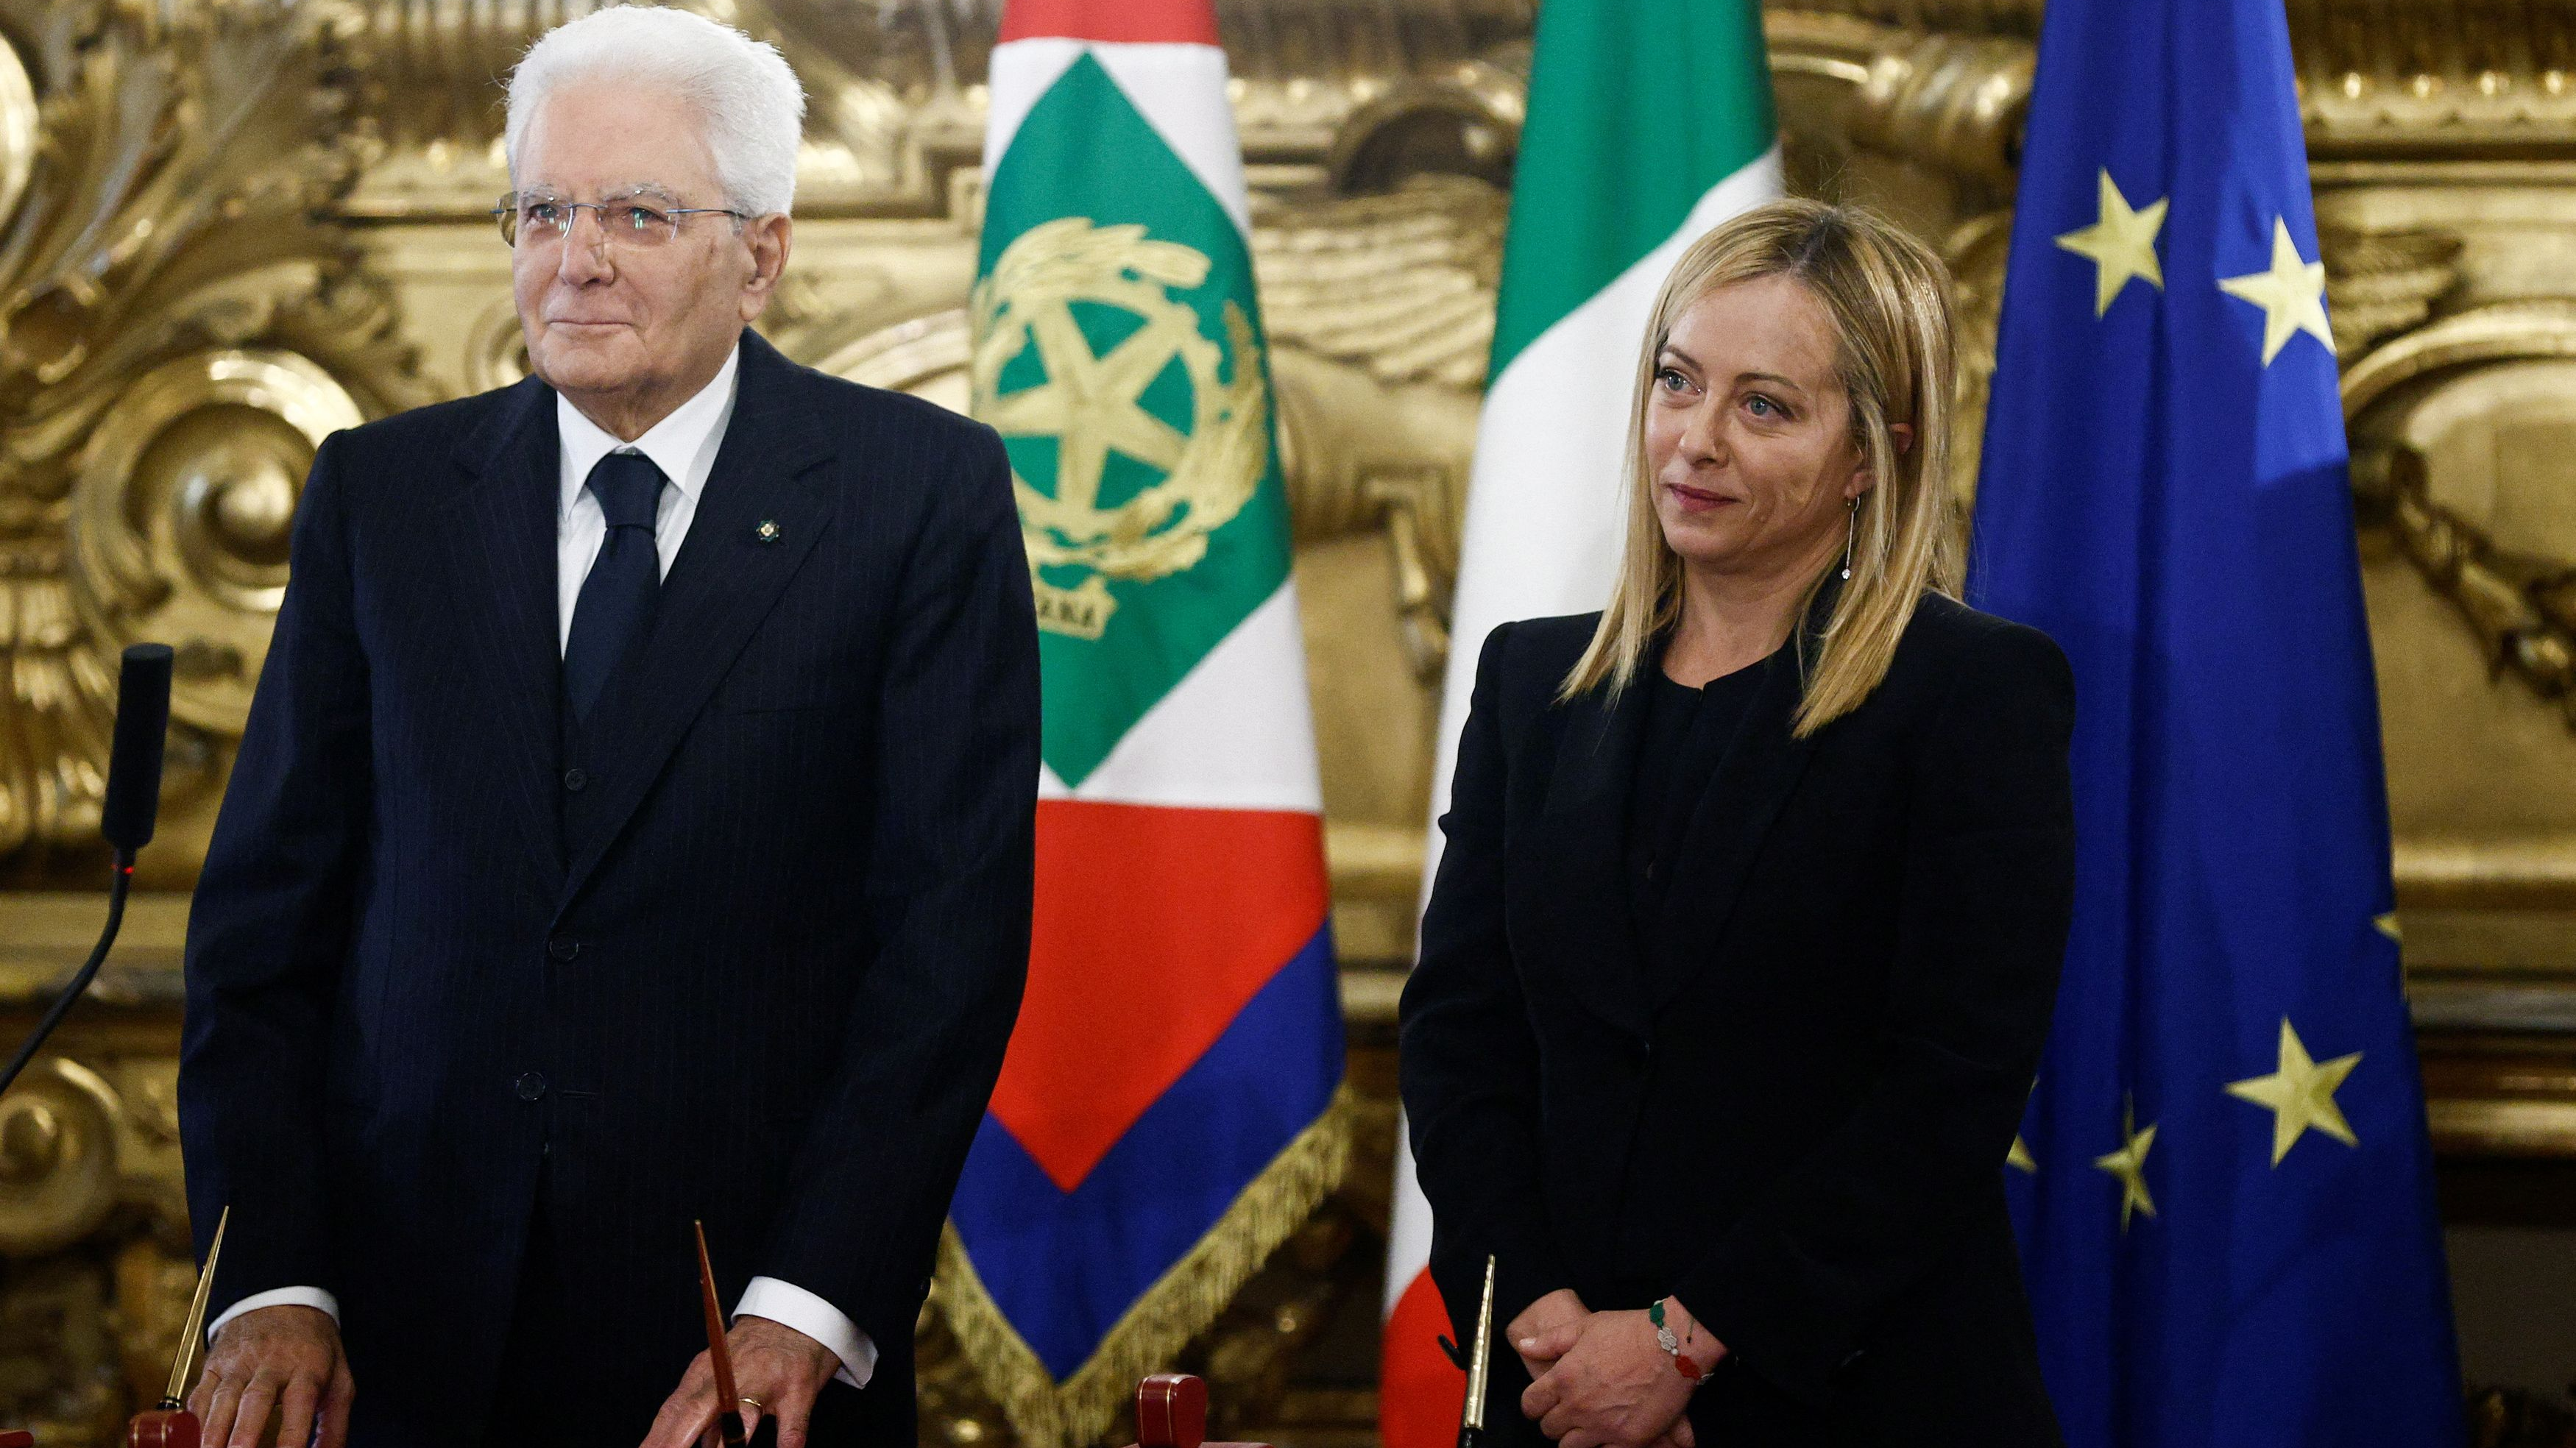 Italy's newly elected Prime Minister Giorgia Meloni (R) and Italian President Sergio Mattarella attend the swearing-in ceremony at the Quirinale Presidential Palace, Rome, Italy, October 22, 2022./ Reuters